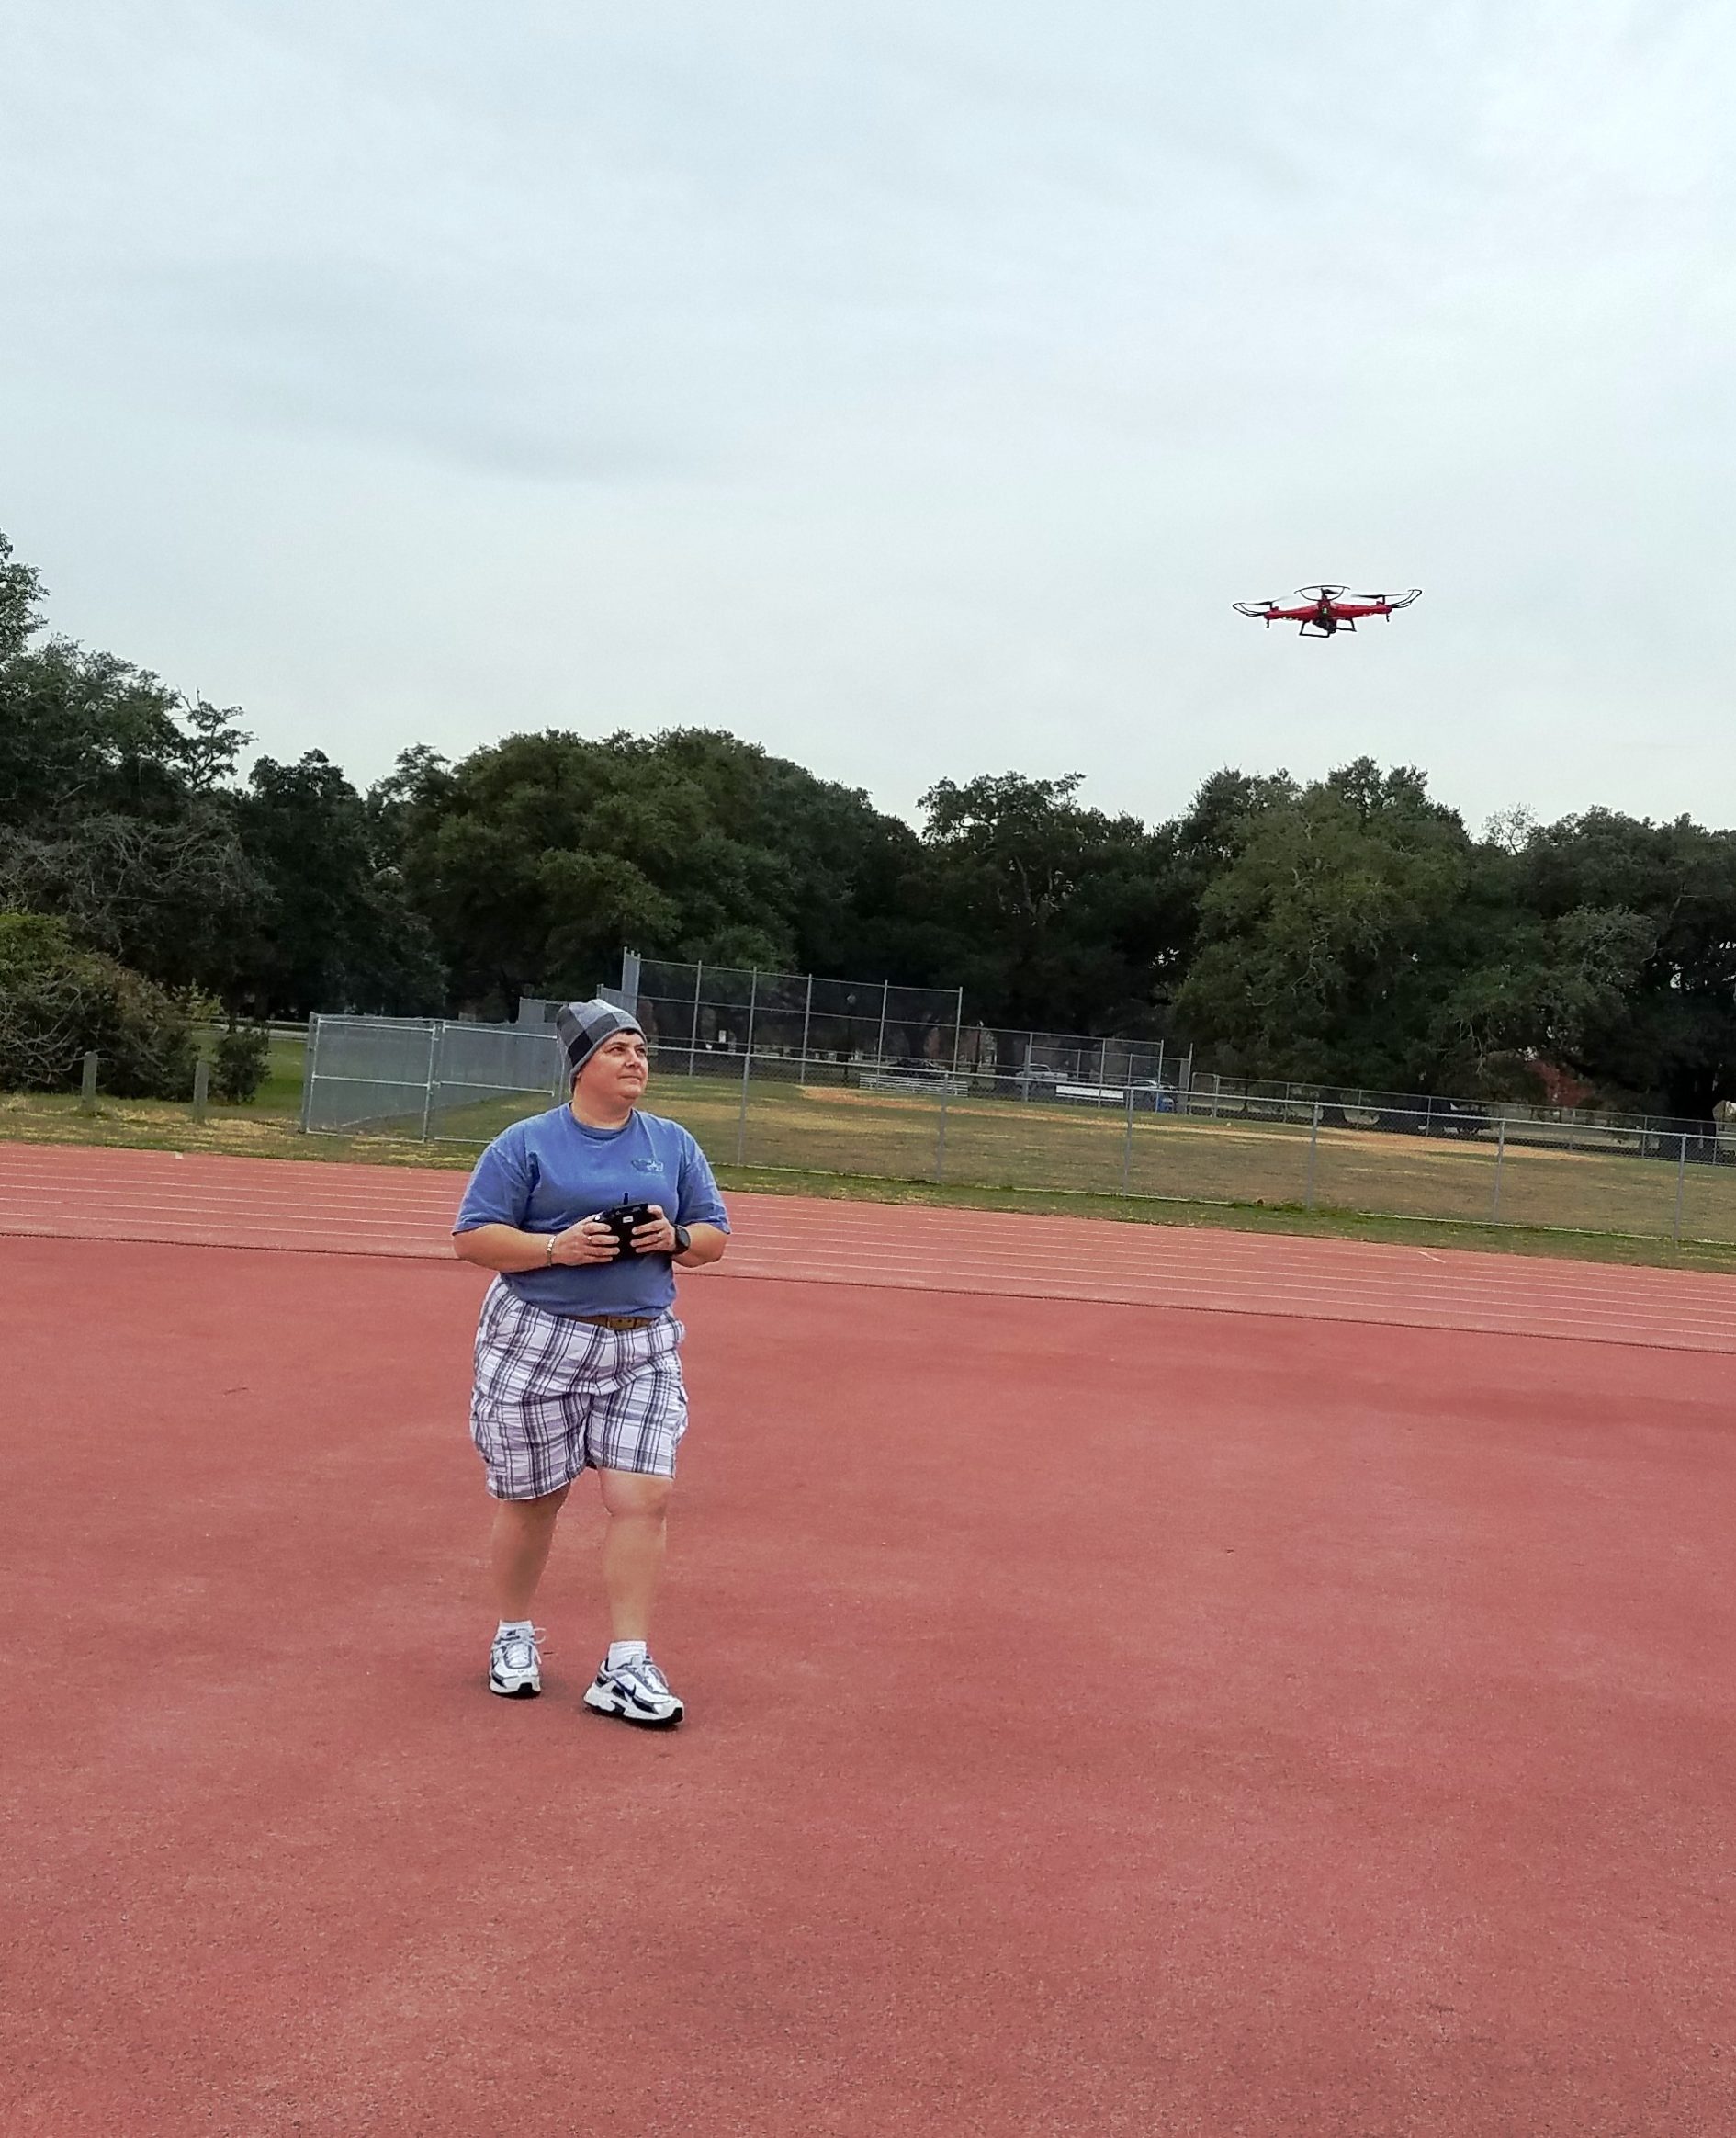 Pam flying a drone!